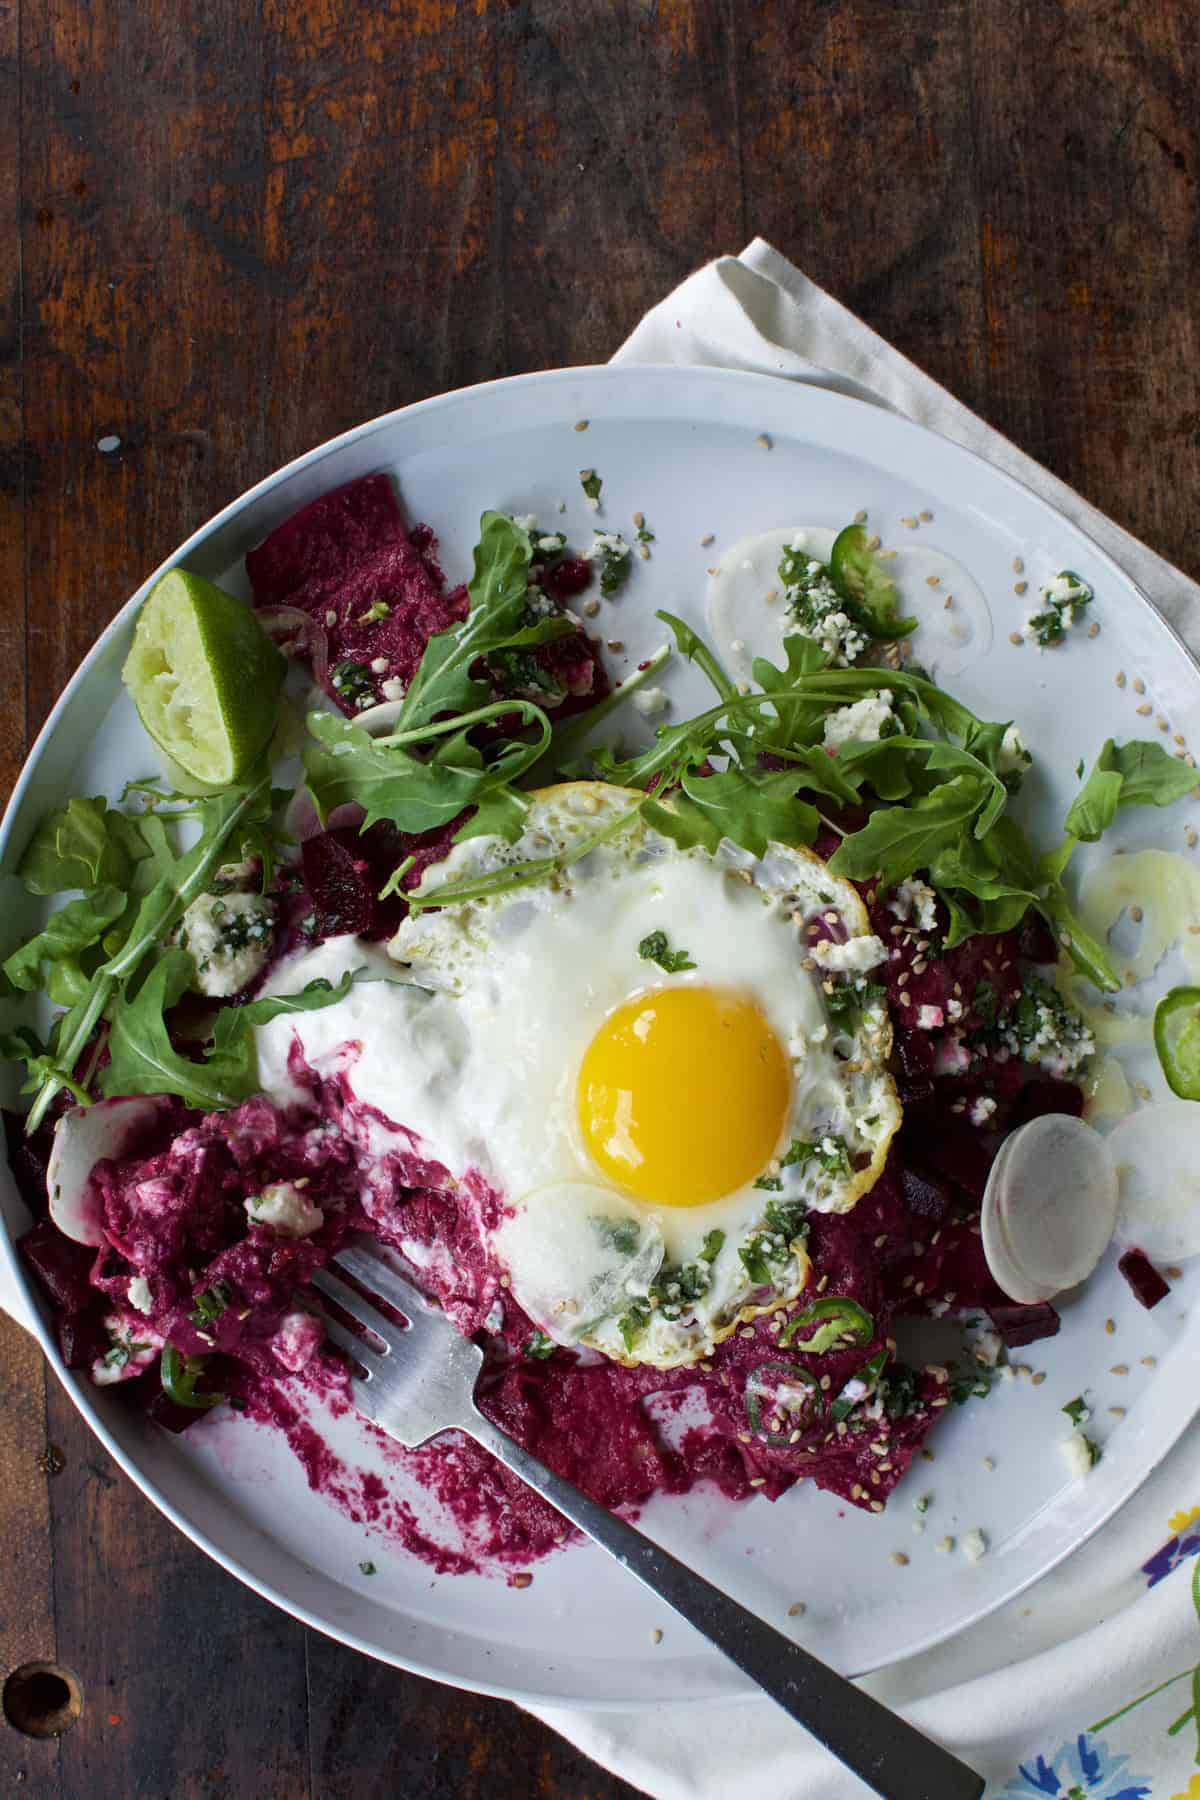 These beet chilaquiles with fried eggs are crisp tortillas covered in a spicy beet salsa then topped with a crumbly herb cheese, sour cream, and fried eggs.